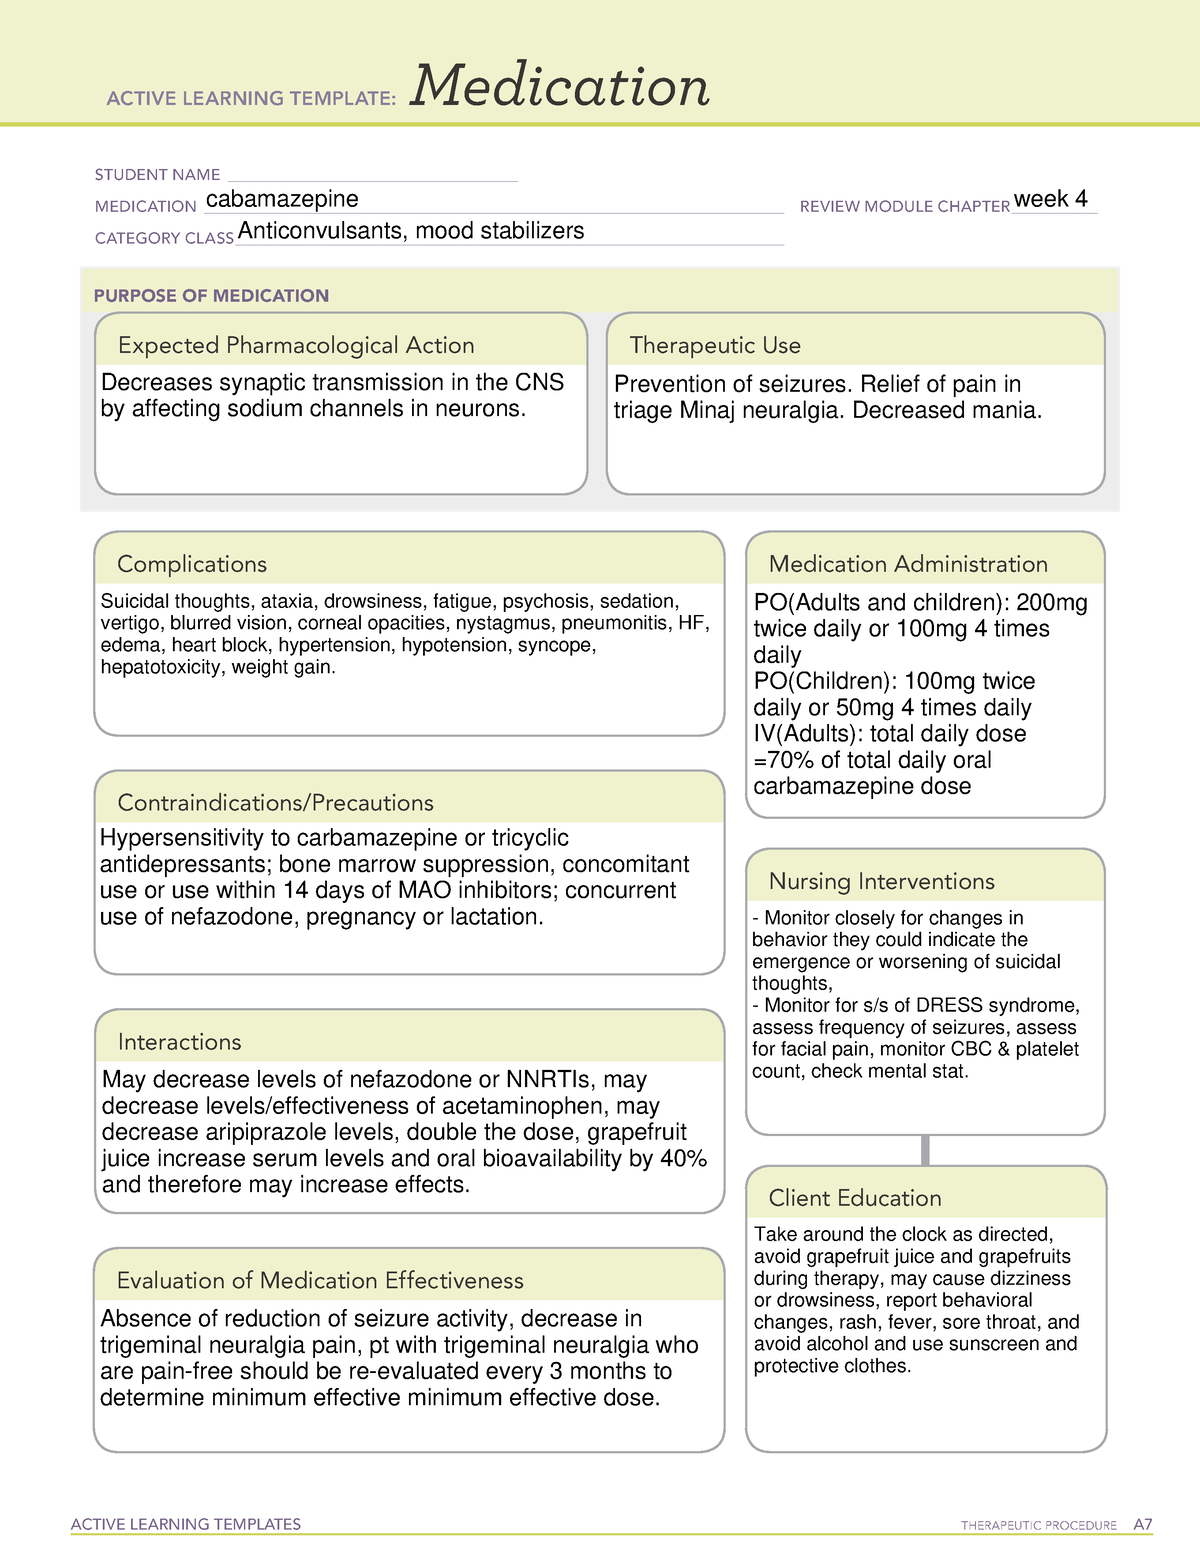 Carbamazepine durg card ACTIVE LEARNING TEMPLATES THERAPEUTIC